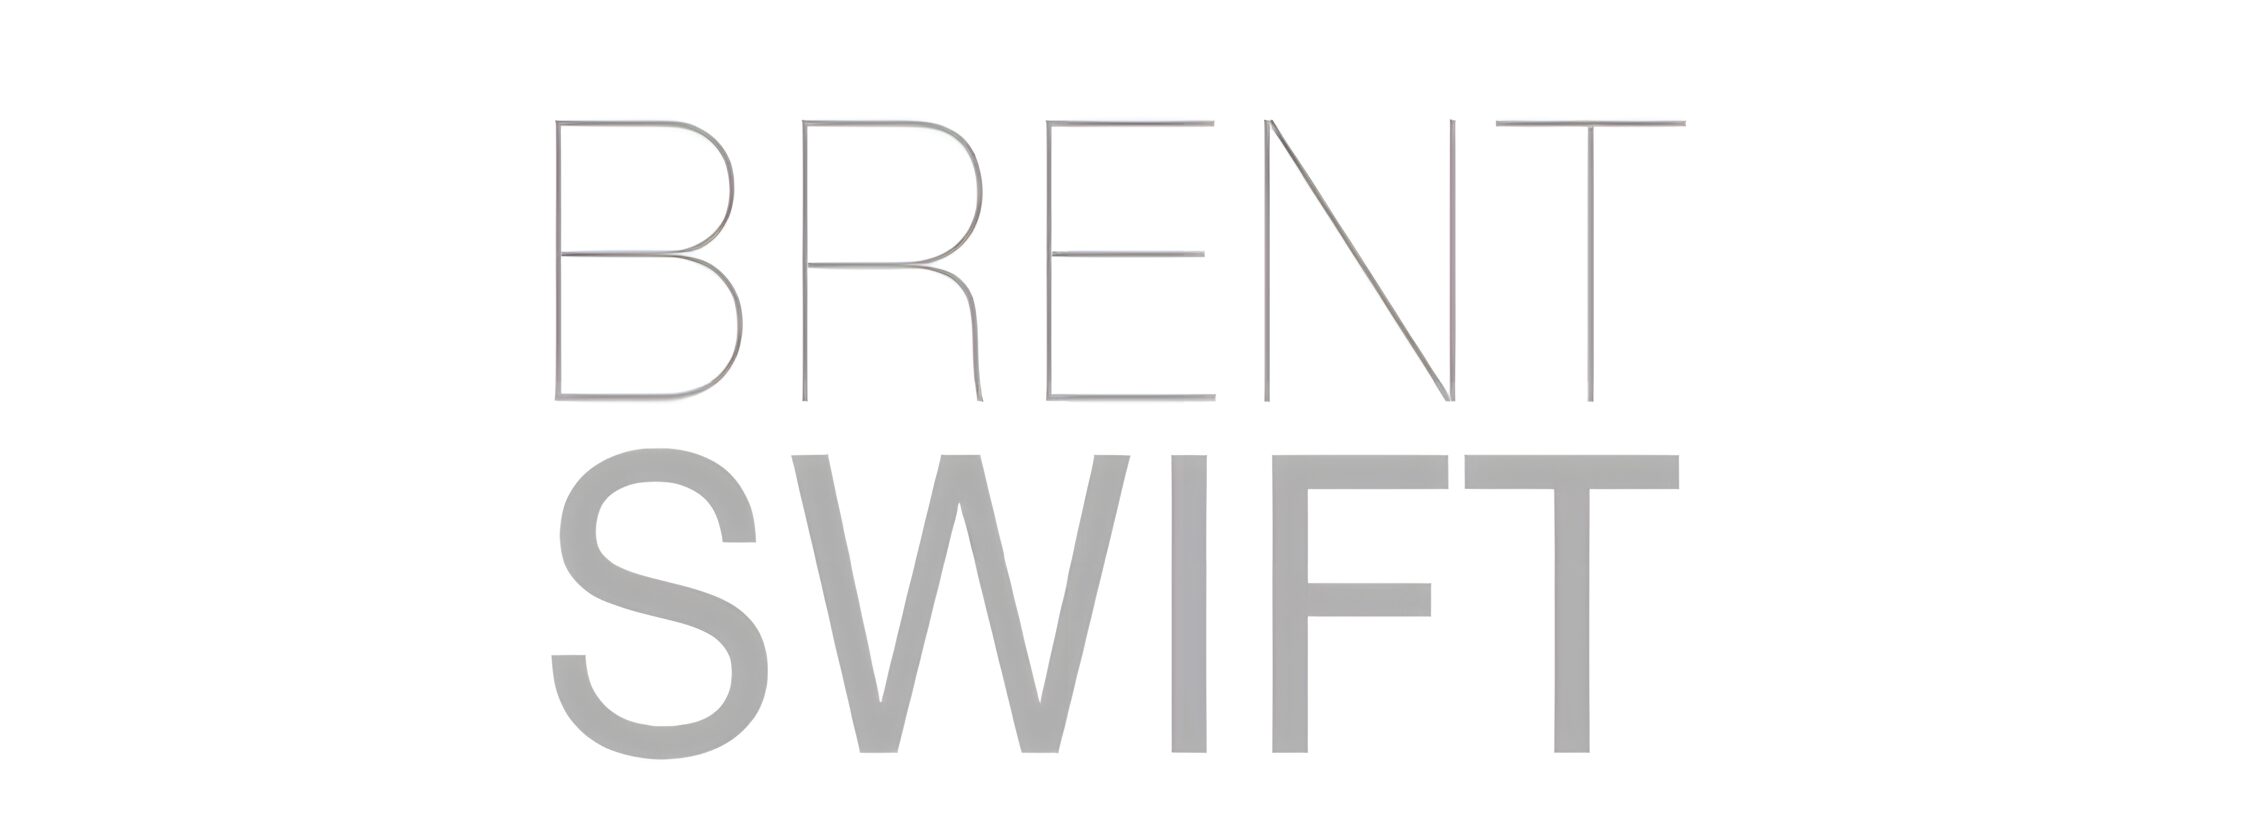 Brent Swift name logo. Purpose is to provide a graphic representation of the man behind the work.